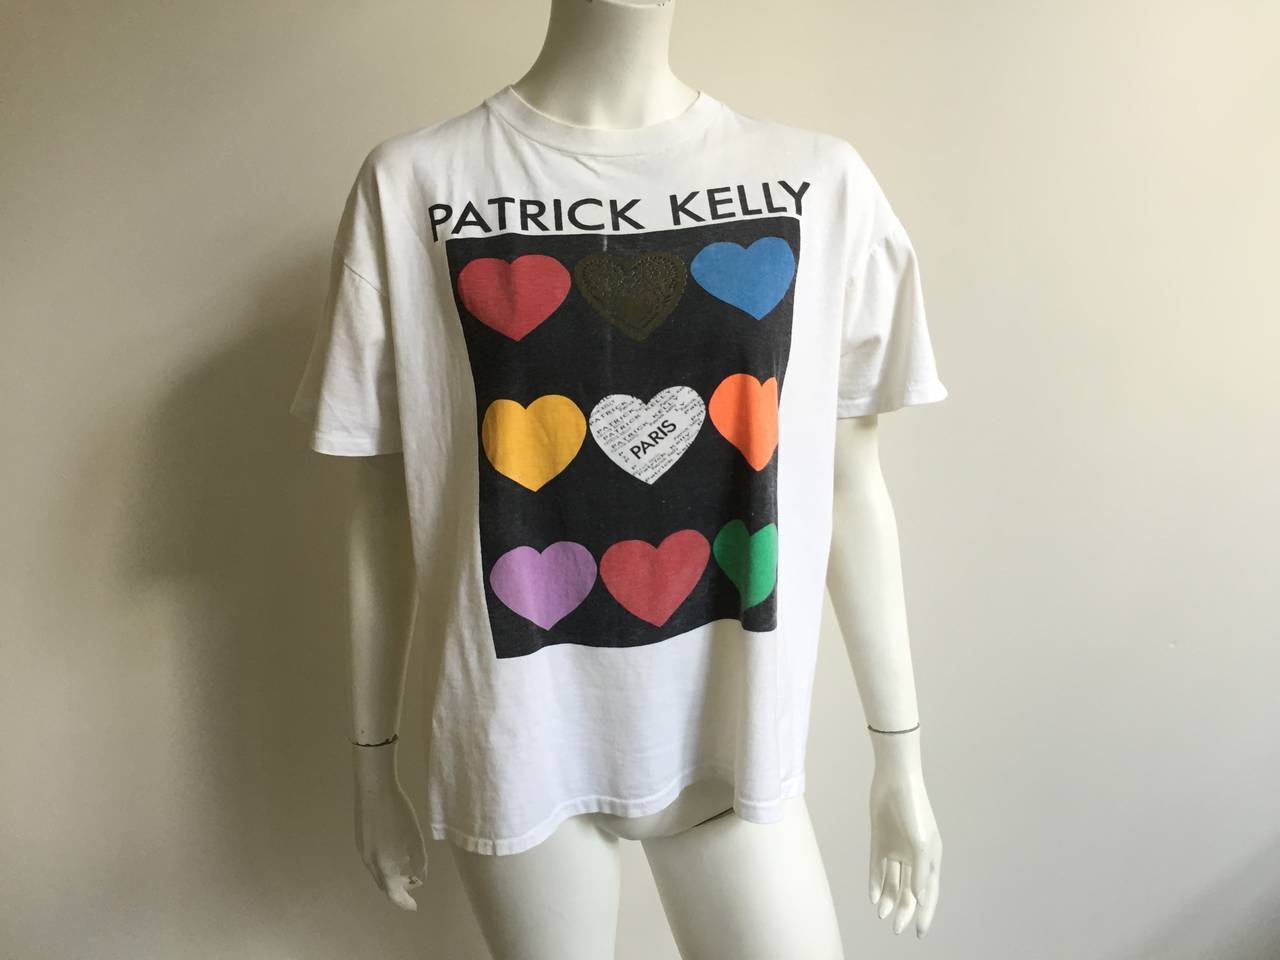 Patrick Kelly 1988 'Hearts' t-shirts is from the private collection of long time friend & model Carol Martin. Patrick Kelly gave this t-shirt to Carol Martin while she was in Paris.
Measurements are: 
44